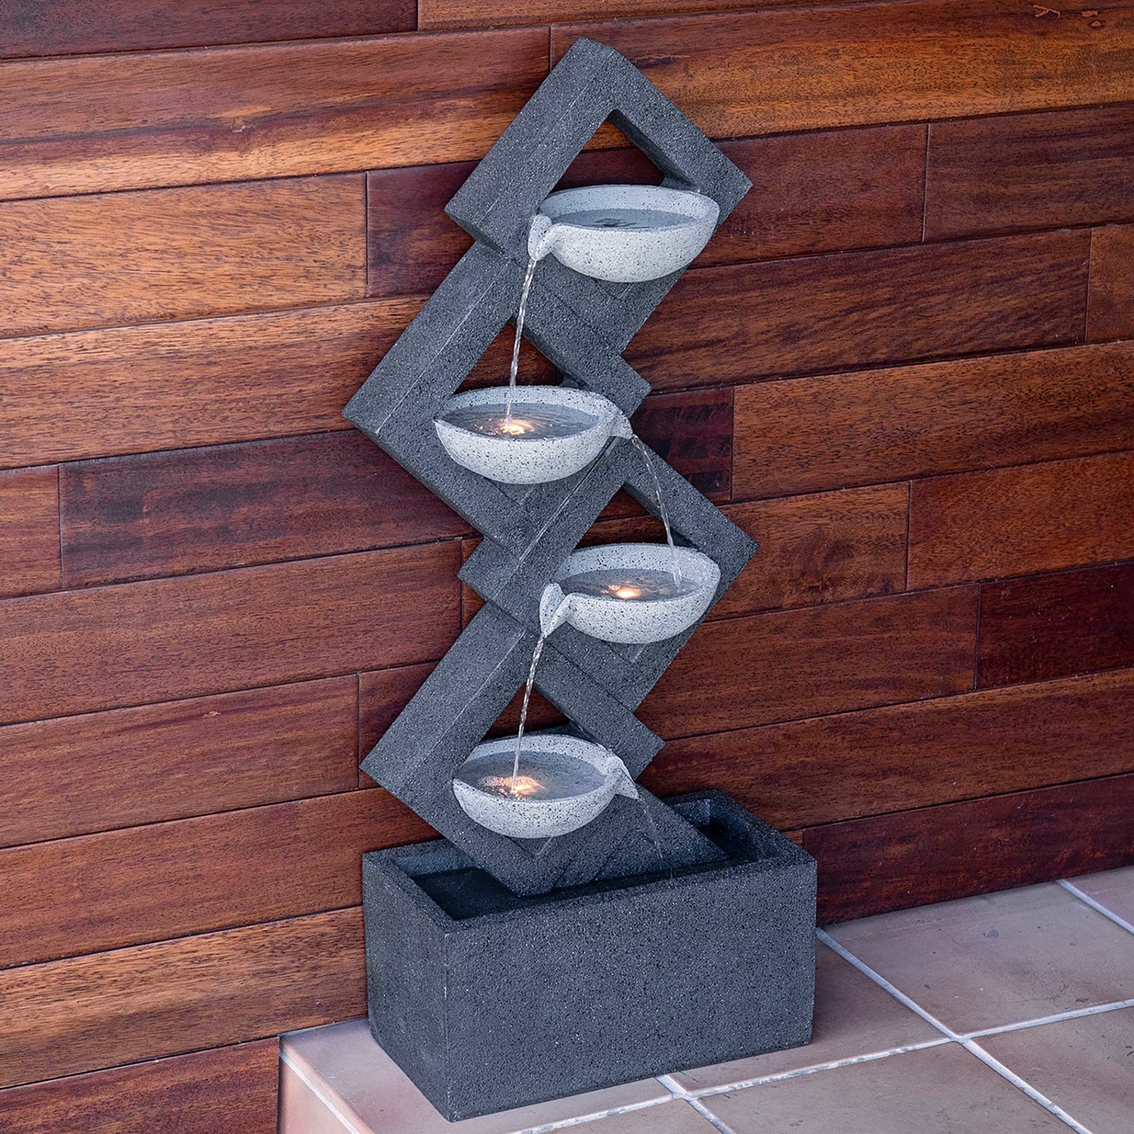 Alpine Calming 4 Tiered Wall Fall Fountain - Image 6 of 6